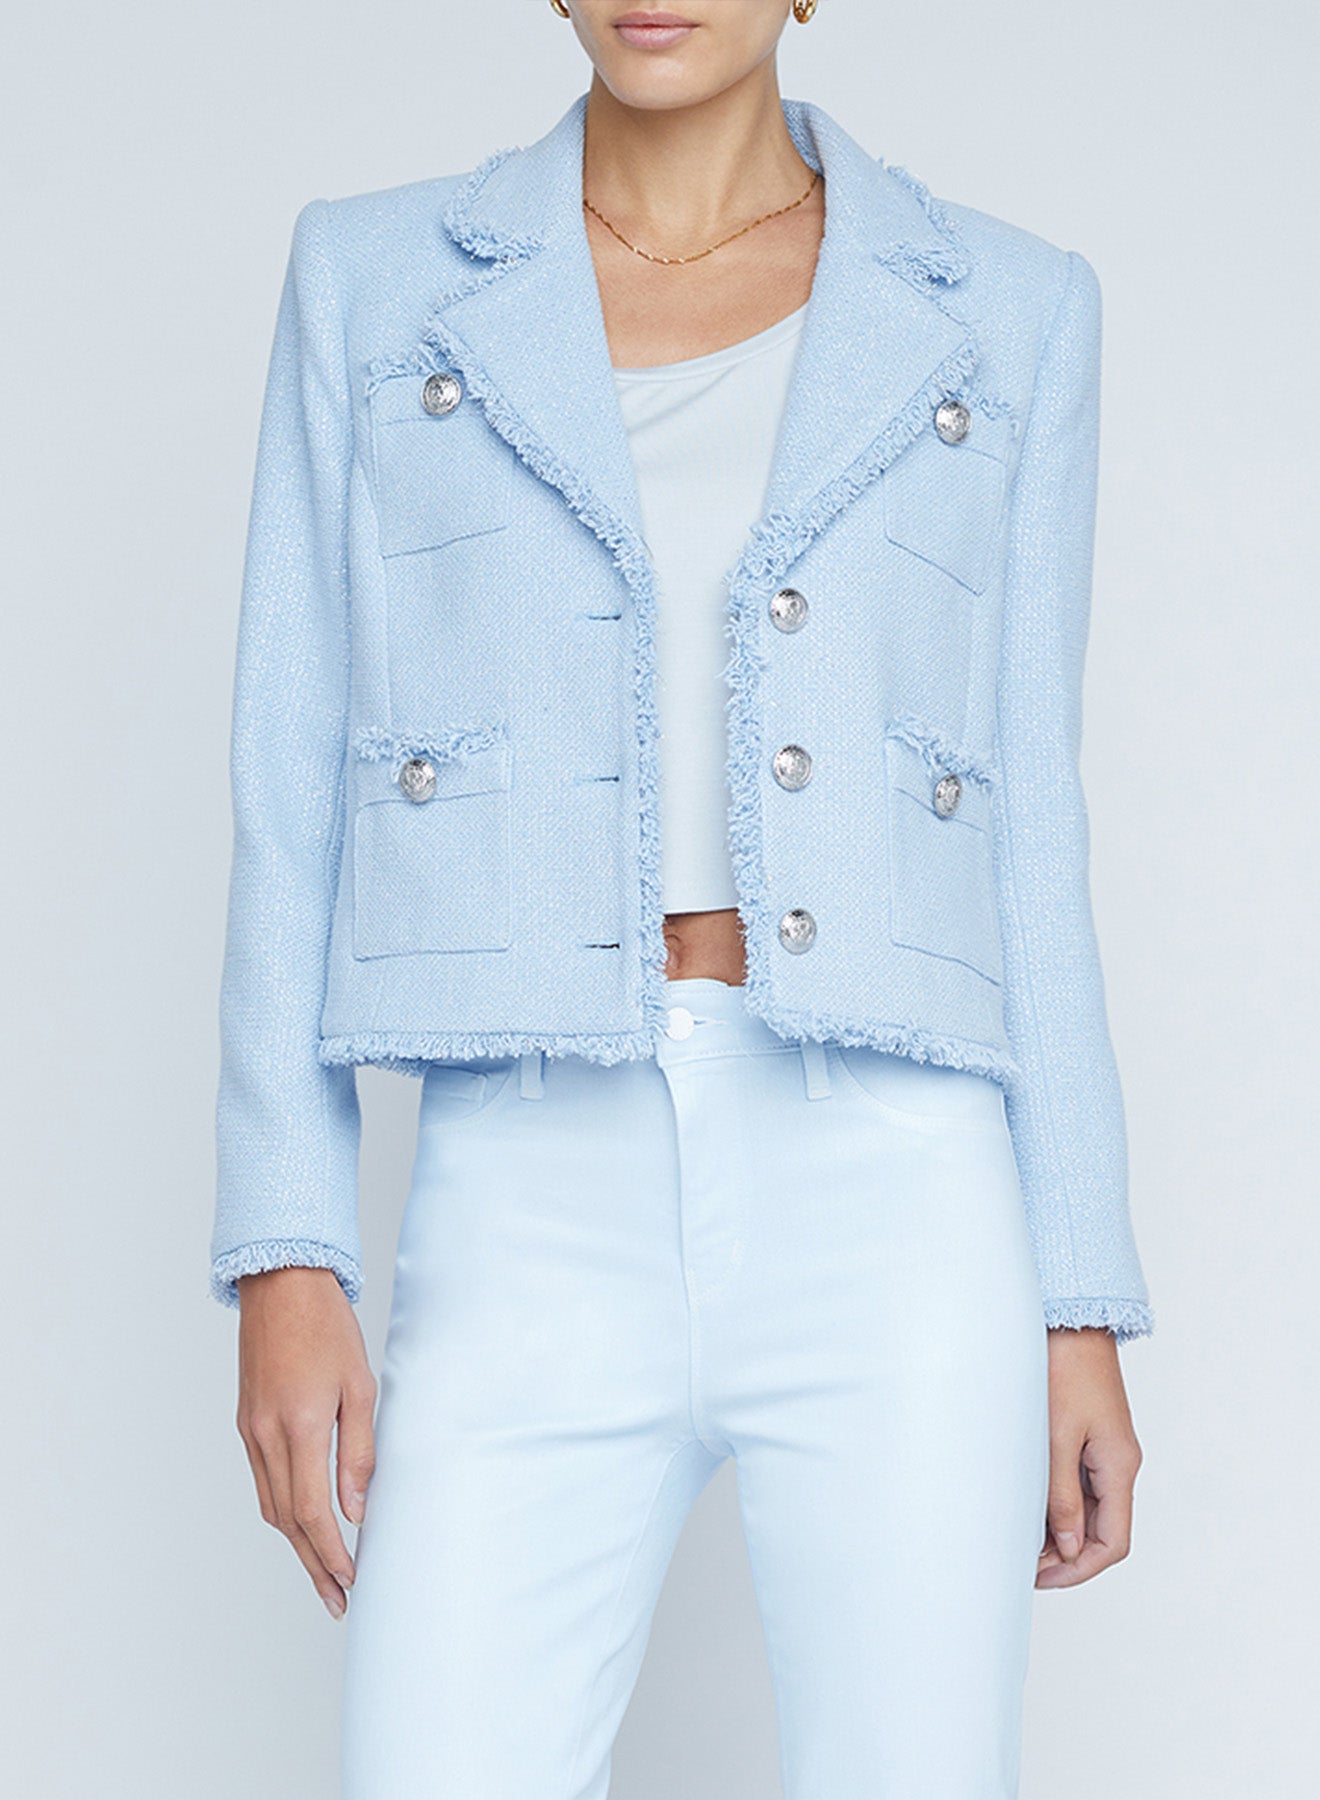 L'AGENCE - Sylvia Collard Jacket in Pale Blue Silver